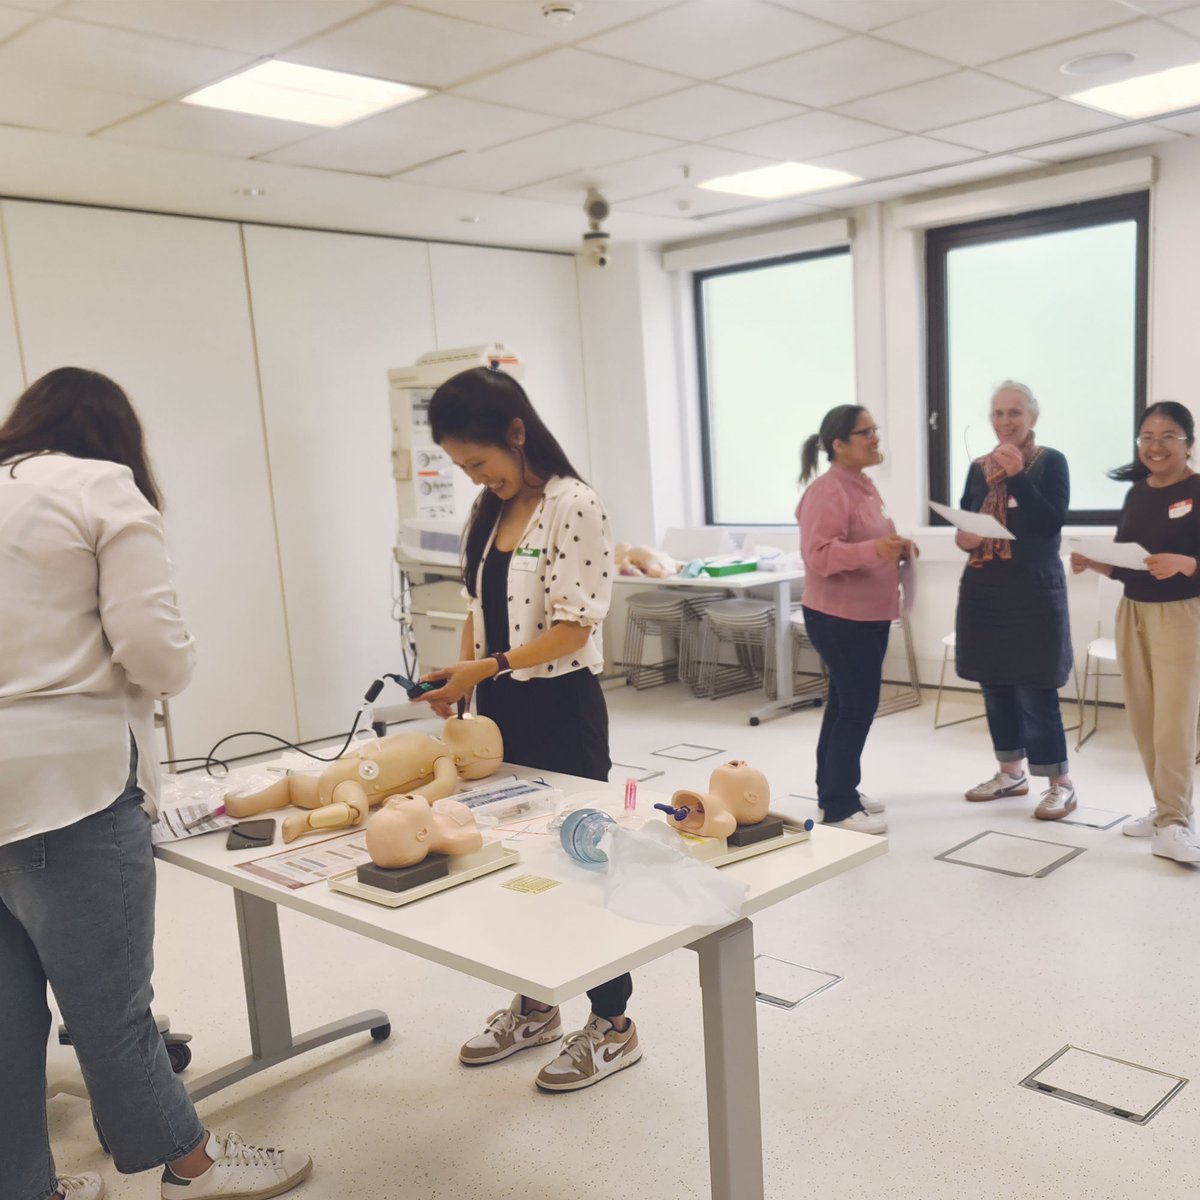 Thank you to all the faculty and to UCLH for hosting our Neonatal Nurses Sim (NNSim) training day. #Simulation # BeANeonatal Nurse @UCLH @Chelsea&Westminster @King'sCollegeHospital